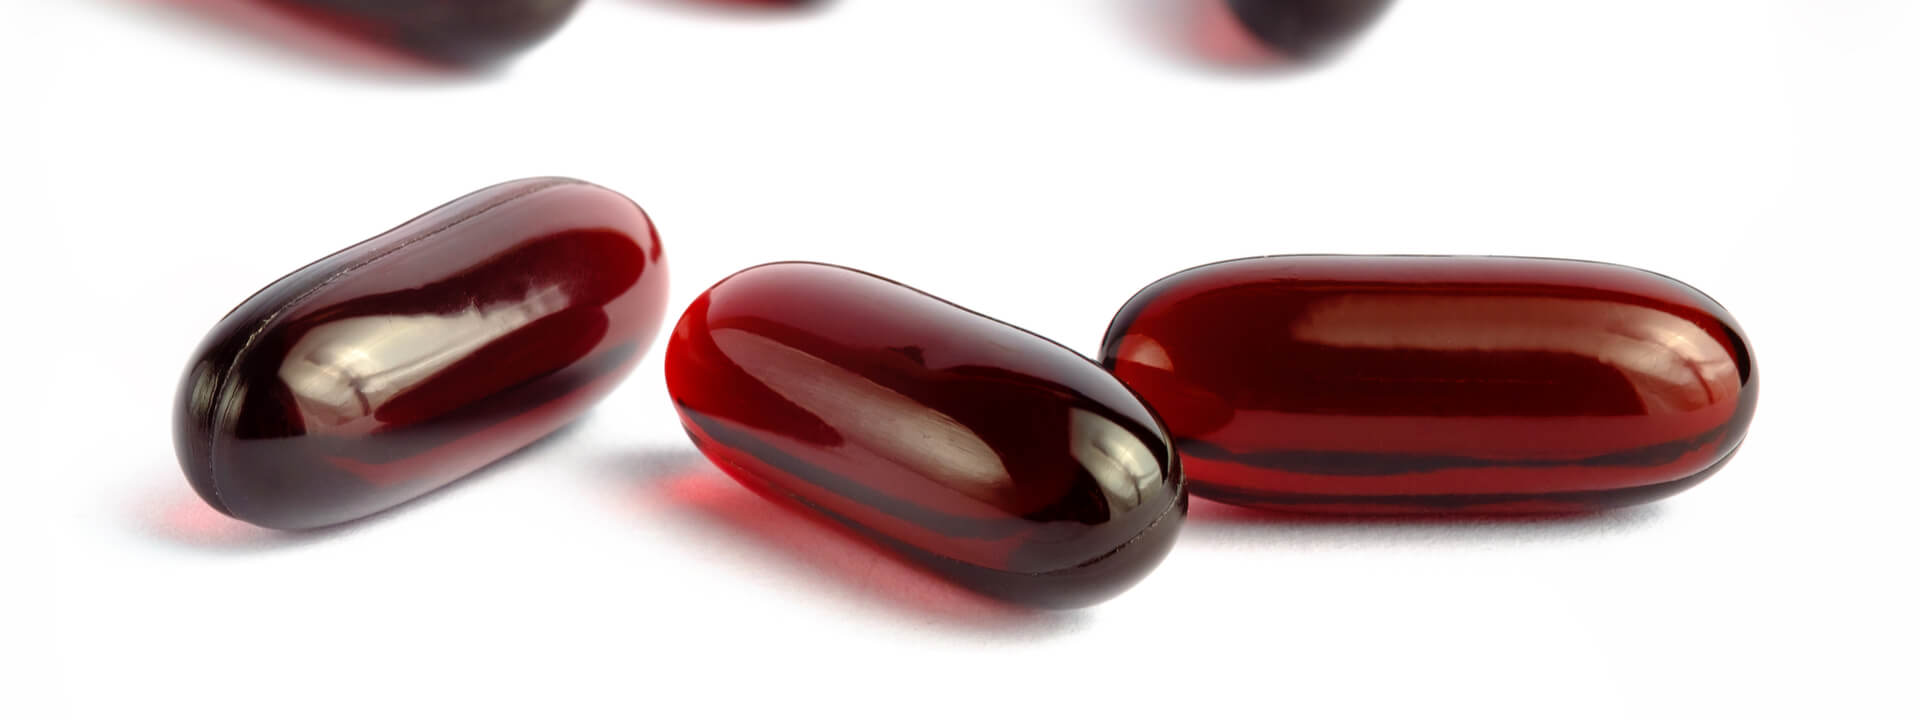 Astaxanthin Combined With Omega 3 Fish Oil Makes For a Potent Antioxidant